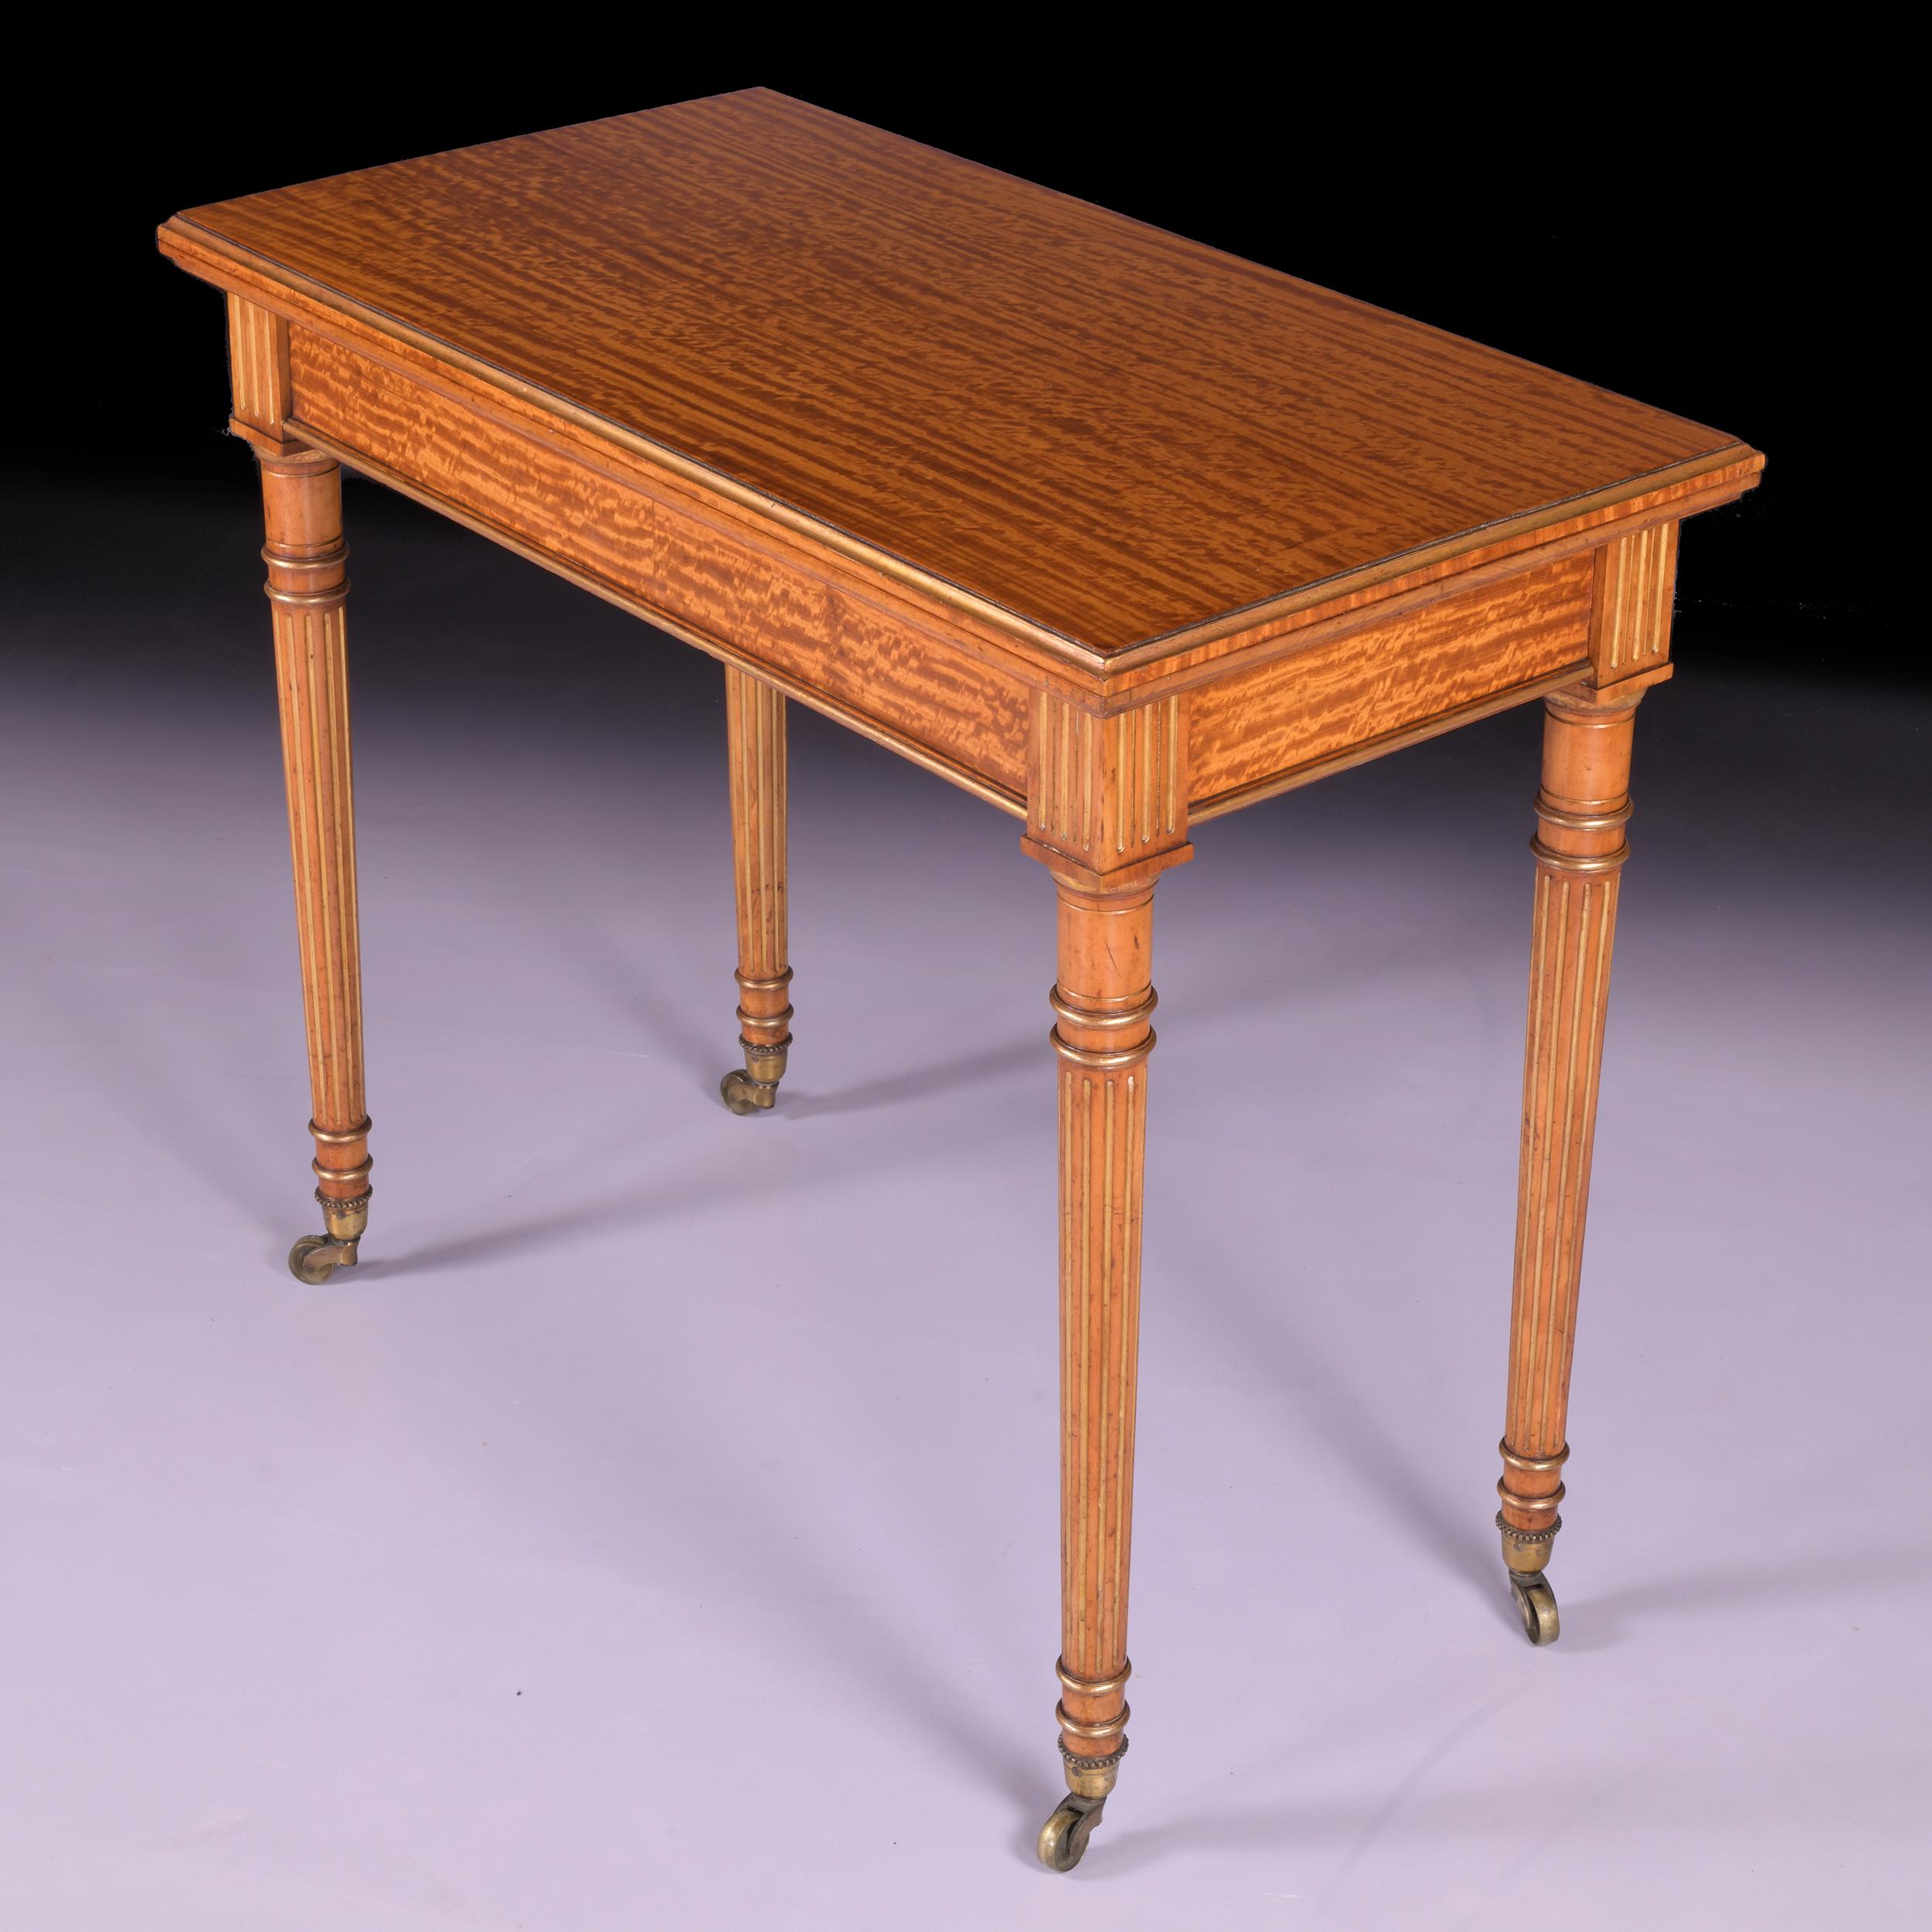 A superb 19th century satinwood and parcel gilt games table, the rectangular fold-over top with a gilt moulded edge, opening on telescope action to a purple baize playing surface, above a plain frieze, raised on fluted taped legs ending in brass